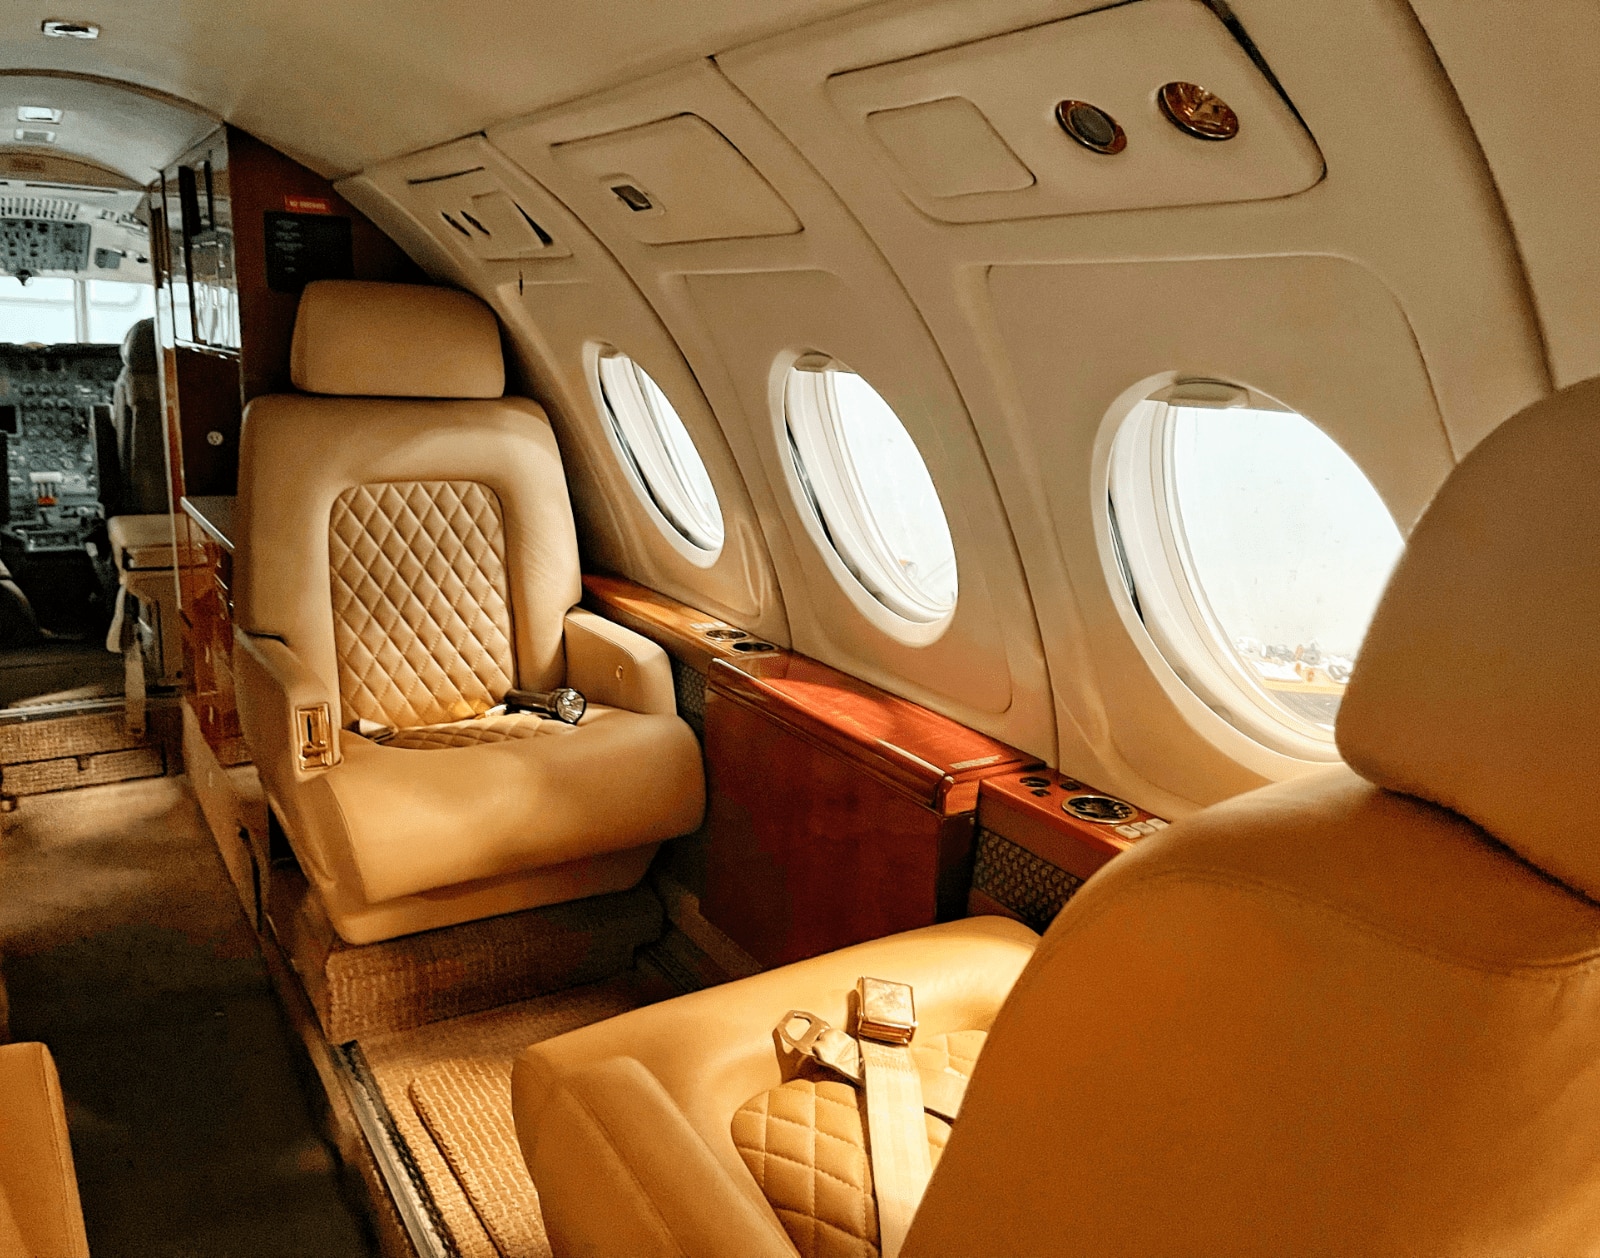 Connecting private flights with luxury travelers